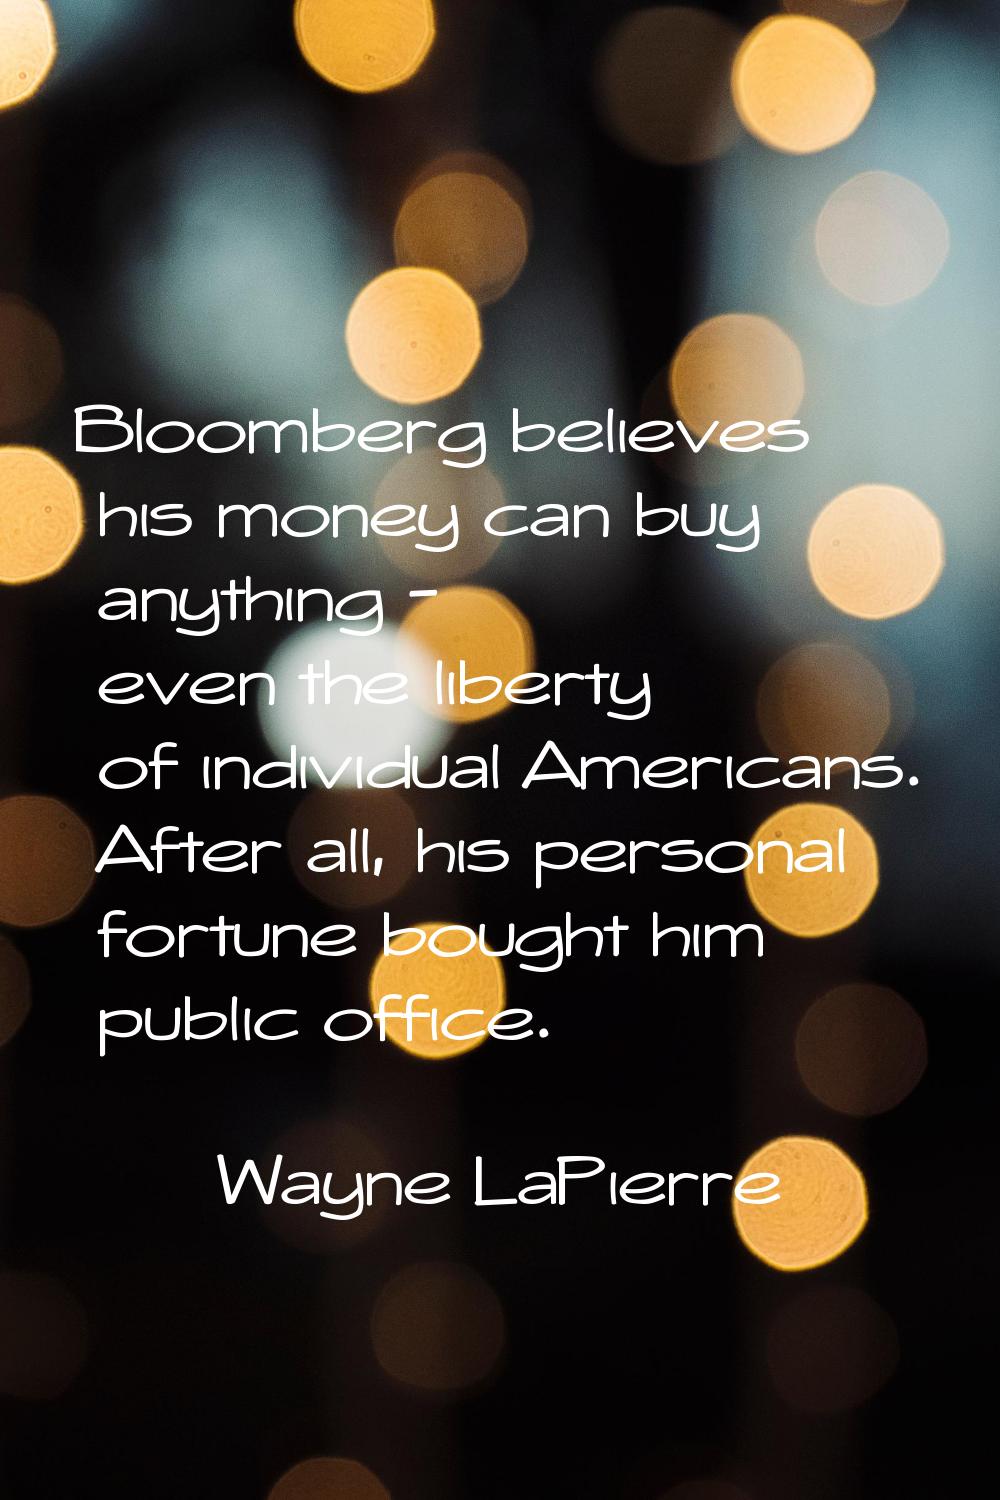 Bloomberg believes his money can buy anything - even the liberty of individual Americans. After all